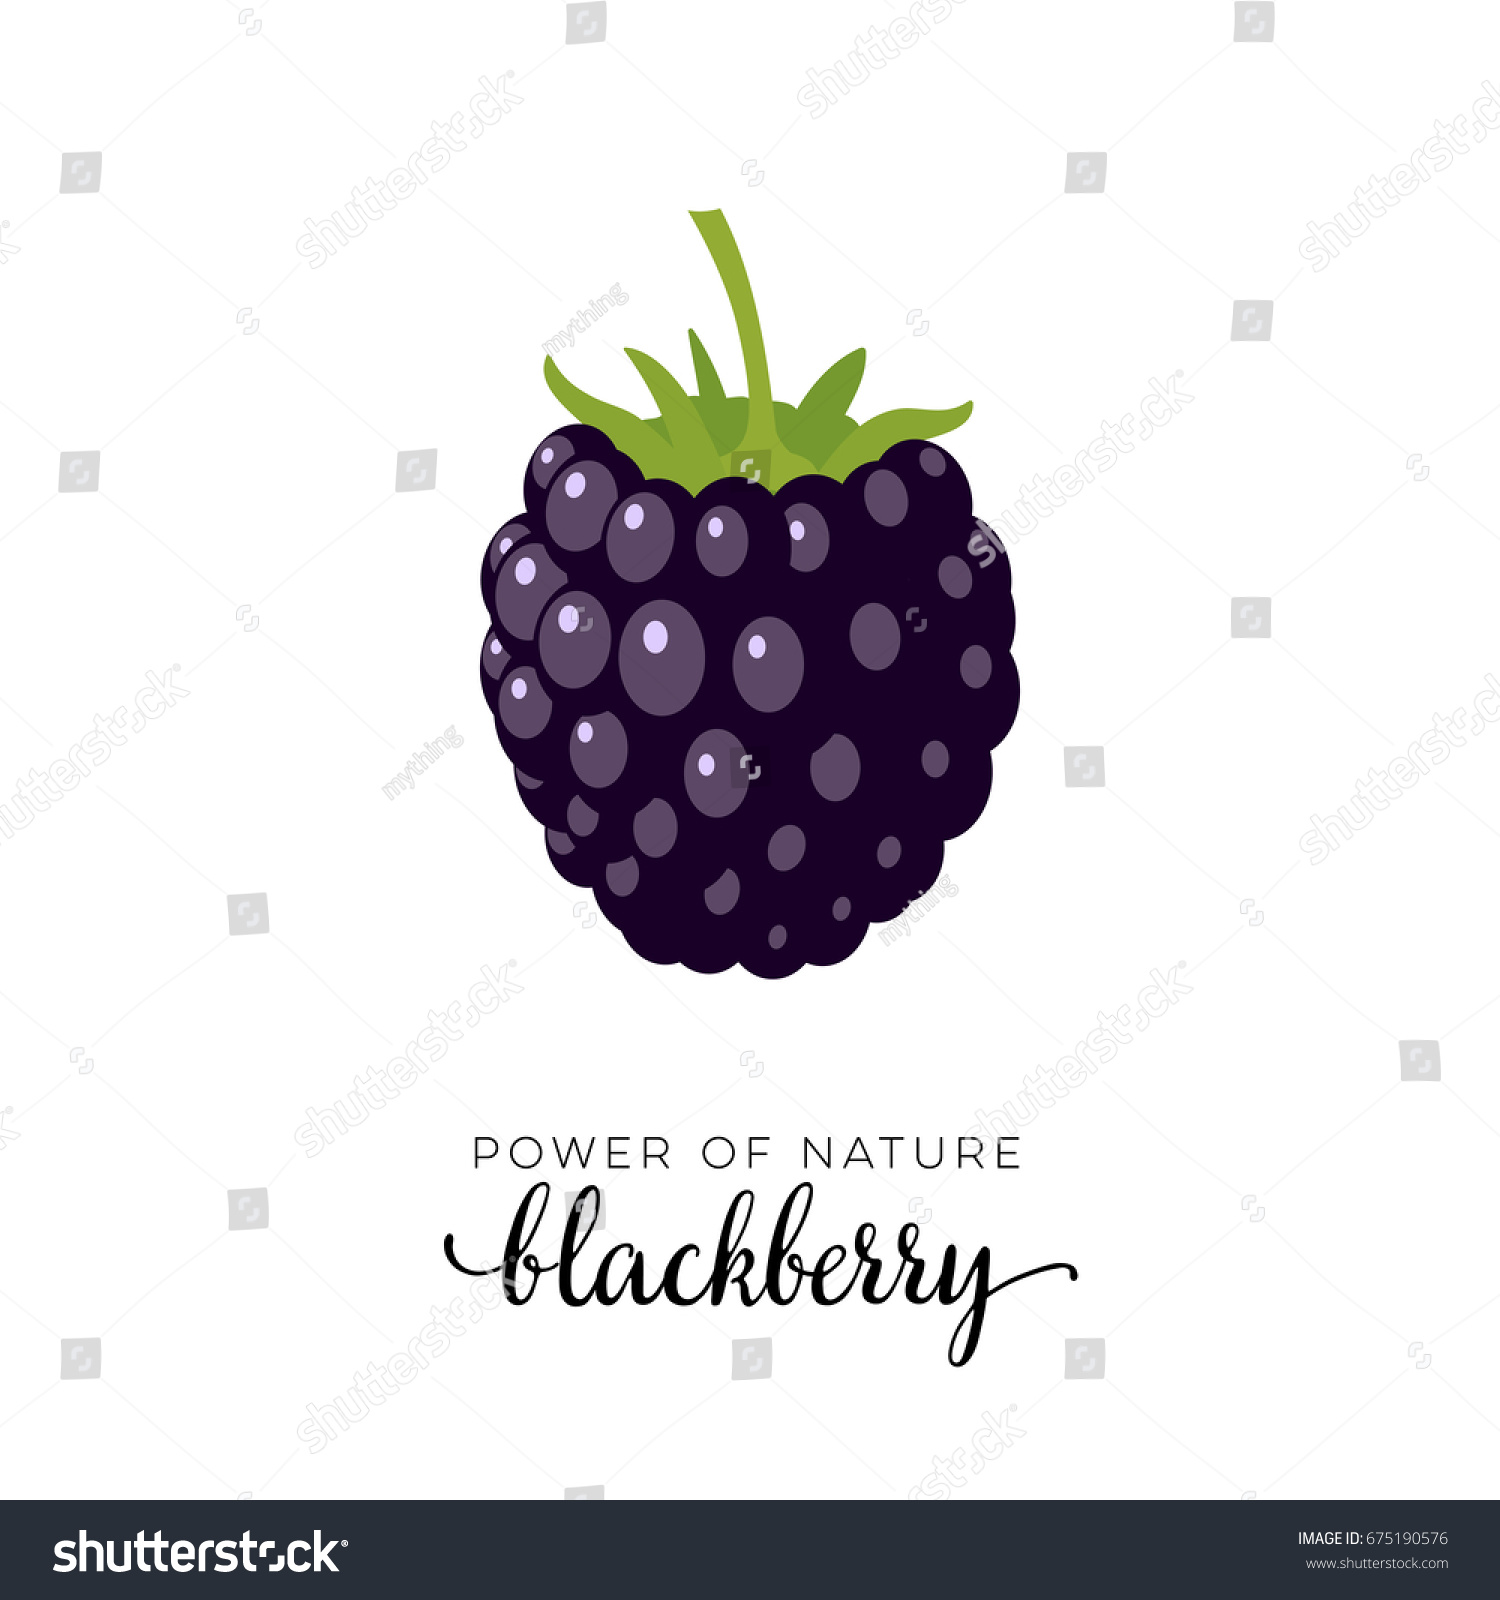 Dark purple blackberry berry flat icon with inscription colorful vector illustration of eco food isolated on white.  #675190576